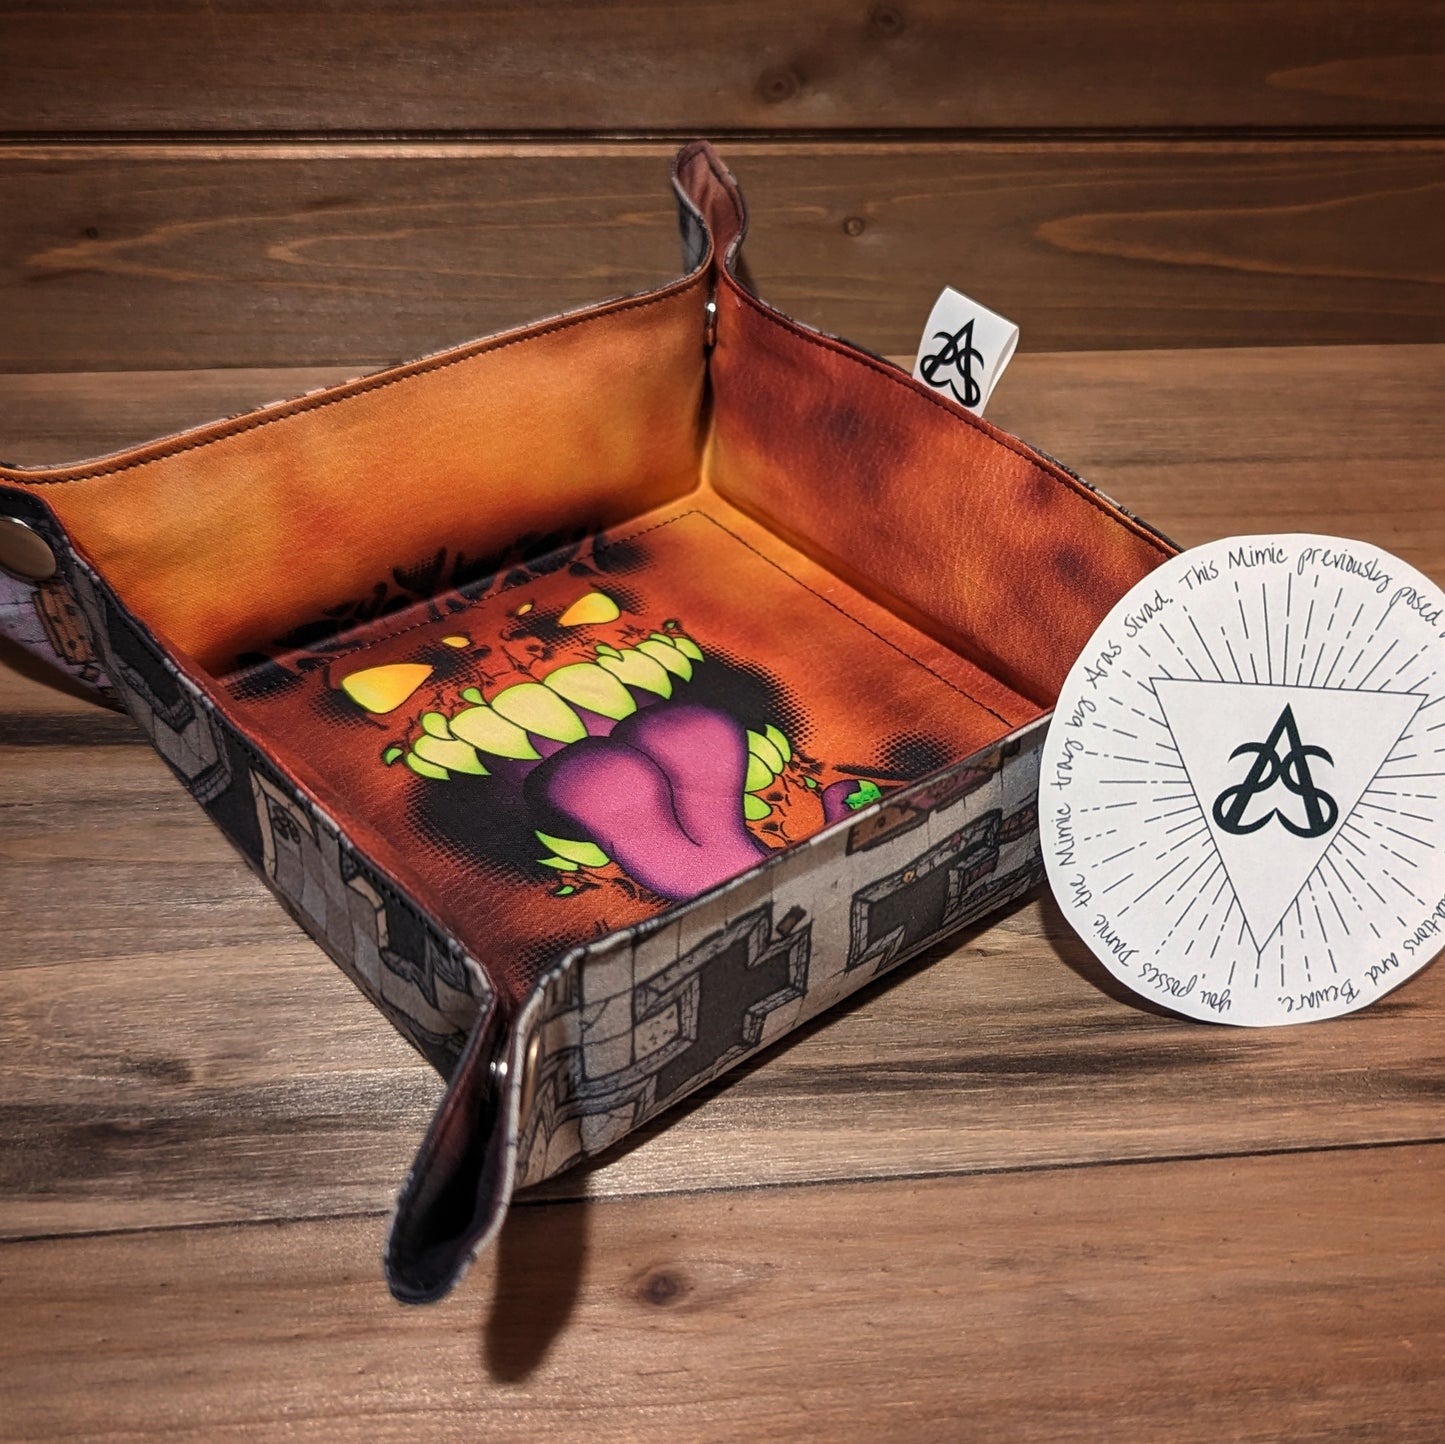 A dice tray with a dungeon map exterior and a mimic print liner has a circular certificate of authenticity with the name and a brief story about the mimic.